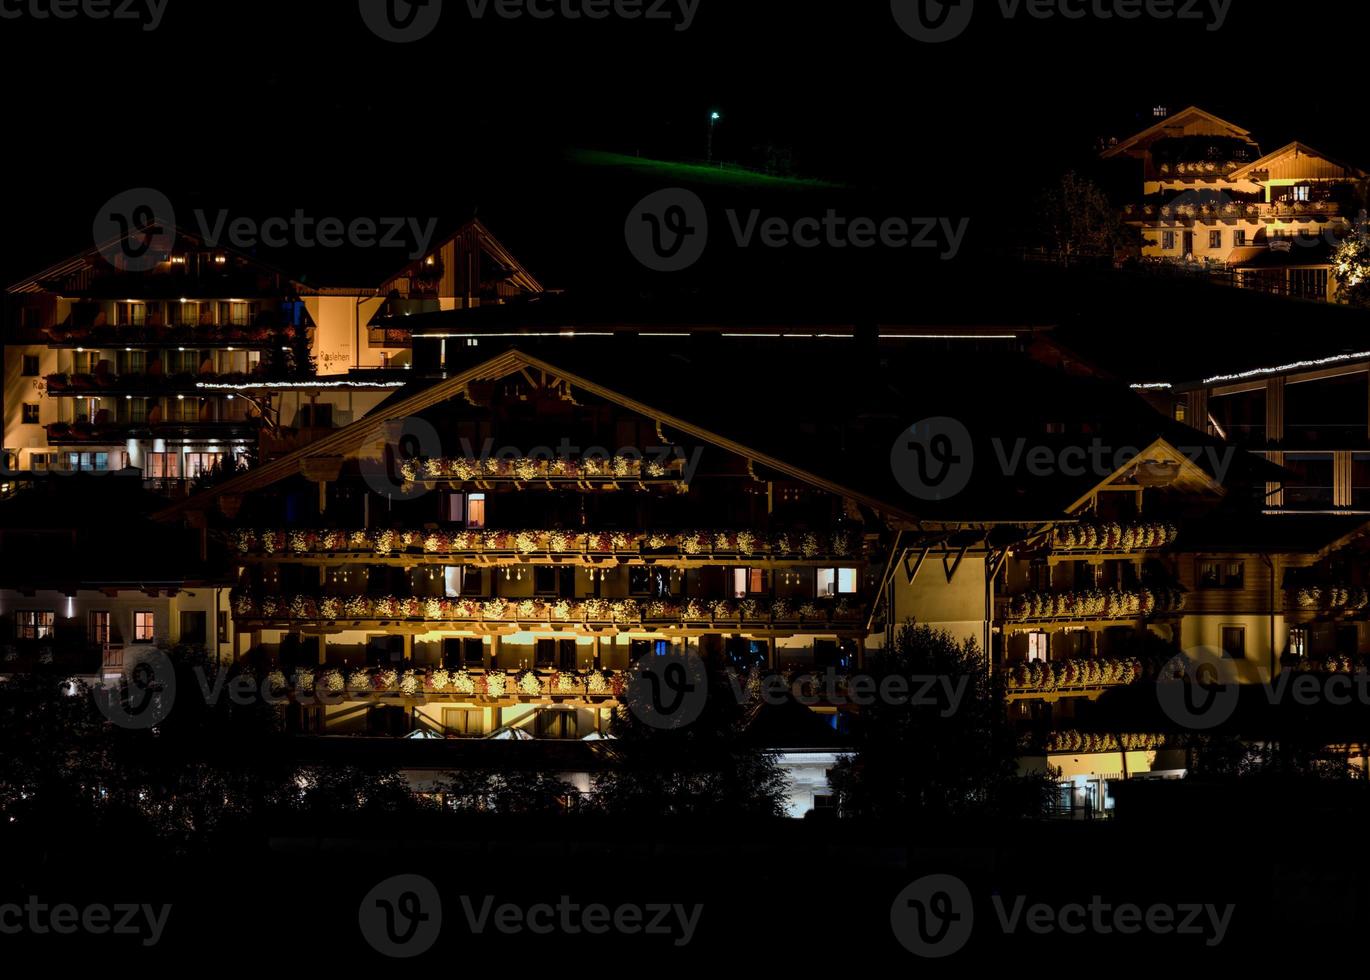 The lights of hotels standing on a slope in the Night. photo